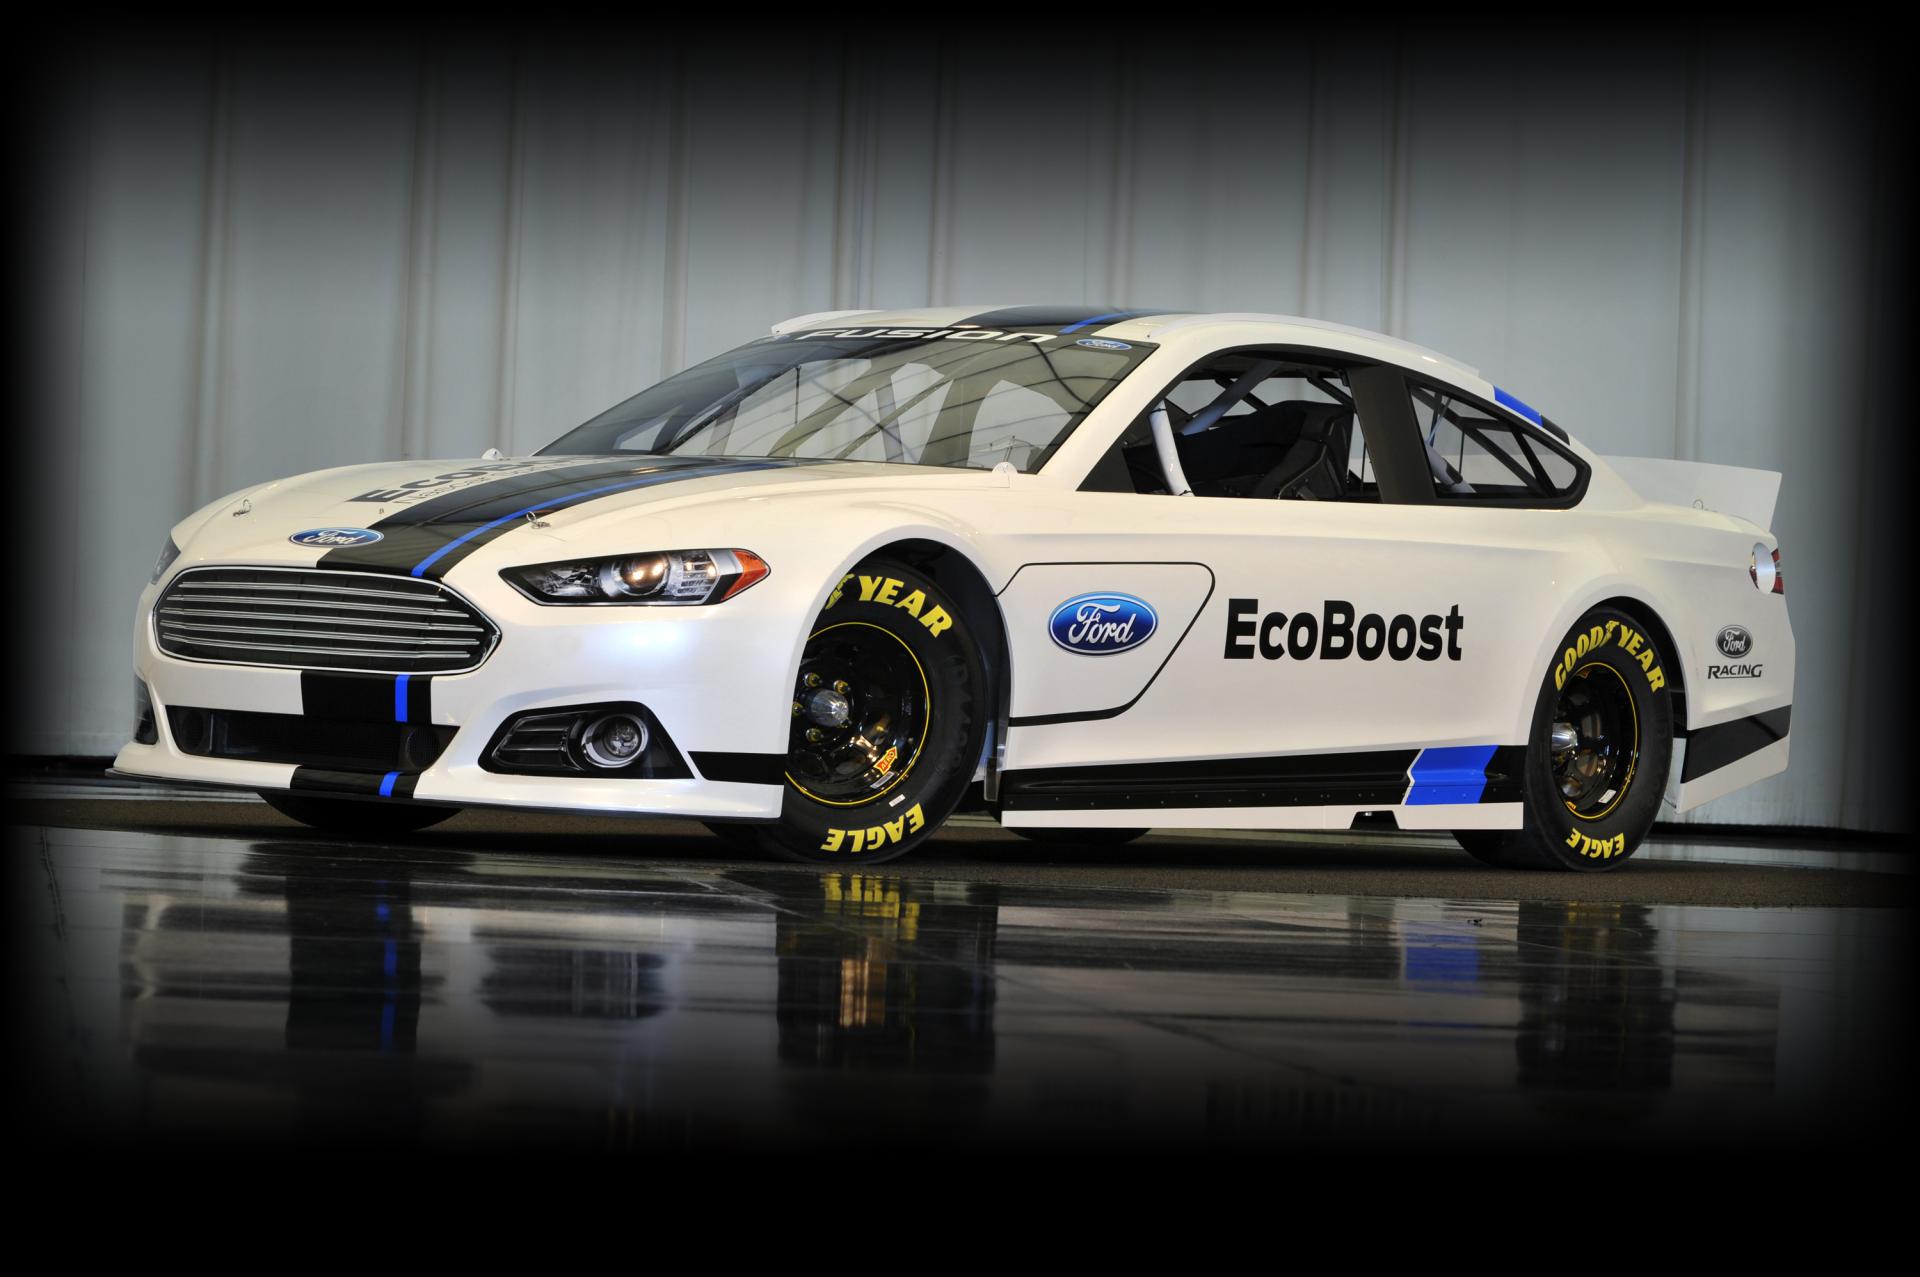 2013 Ford Fusion NASCAR Sprint Cup Pictures, News, Research, Pricing - conceptcarz.com